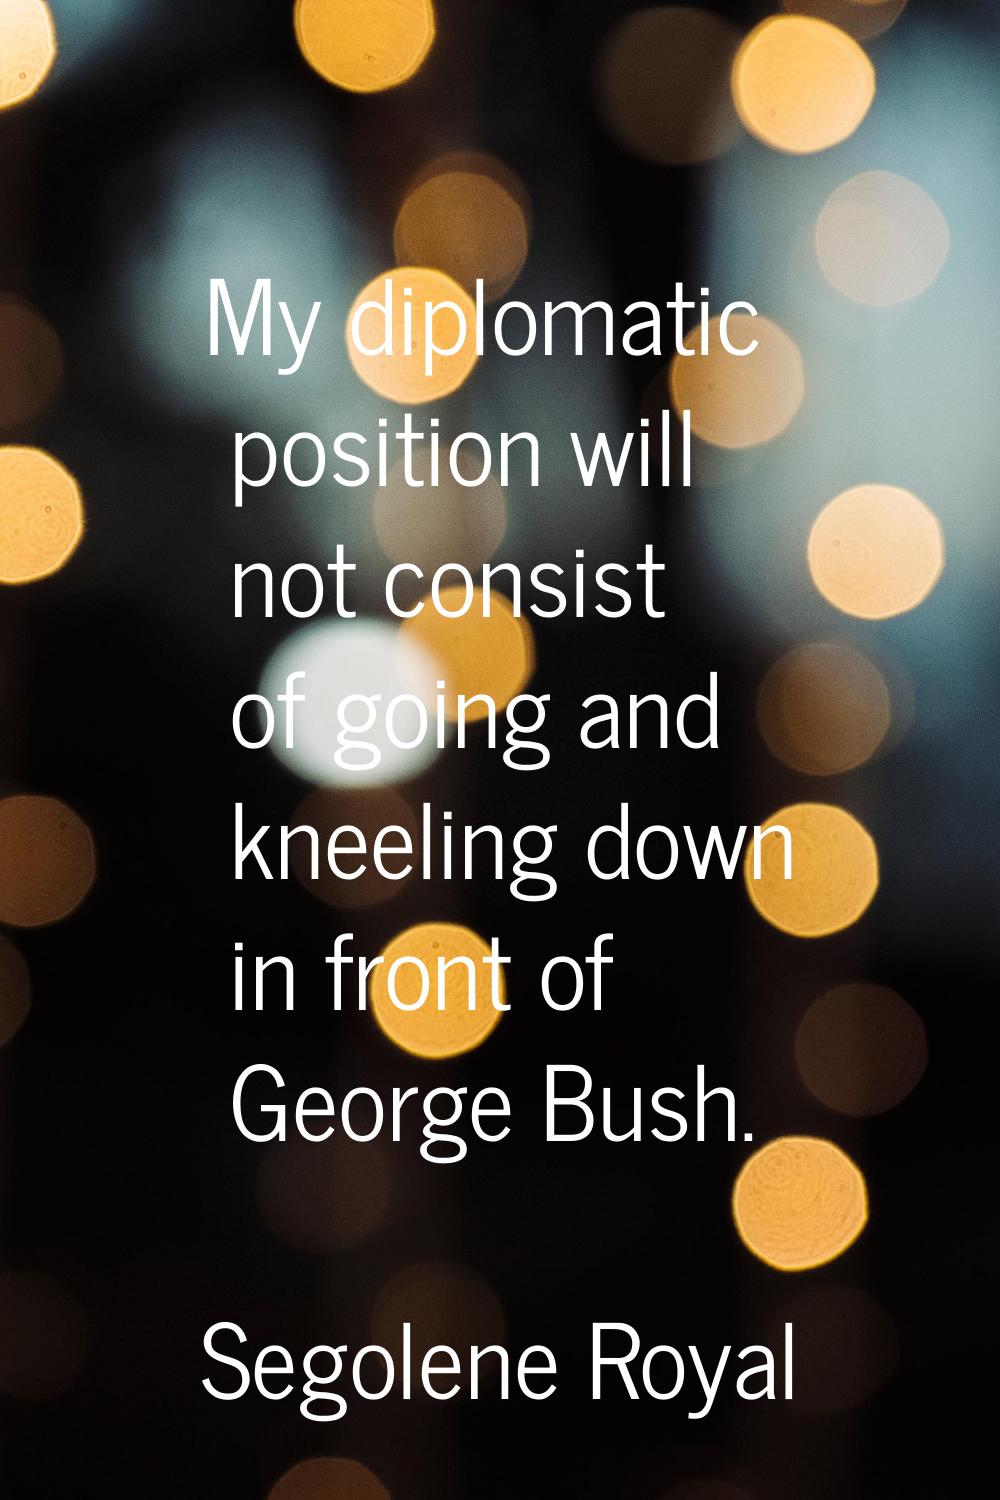 My diplomatic position will not consist of going and kneeling down in front of George Bush.